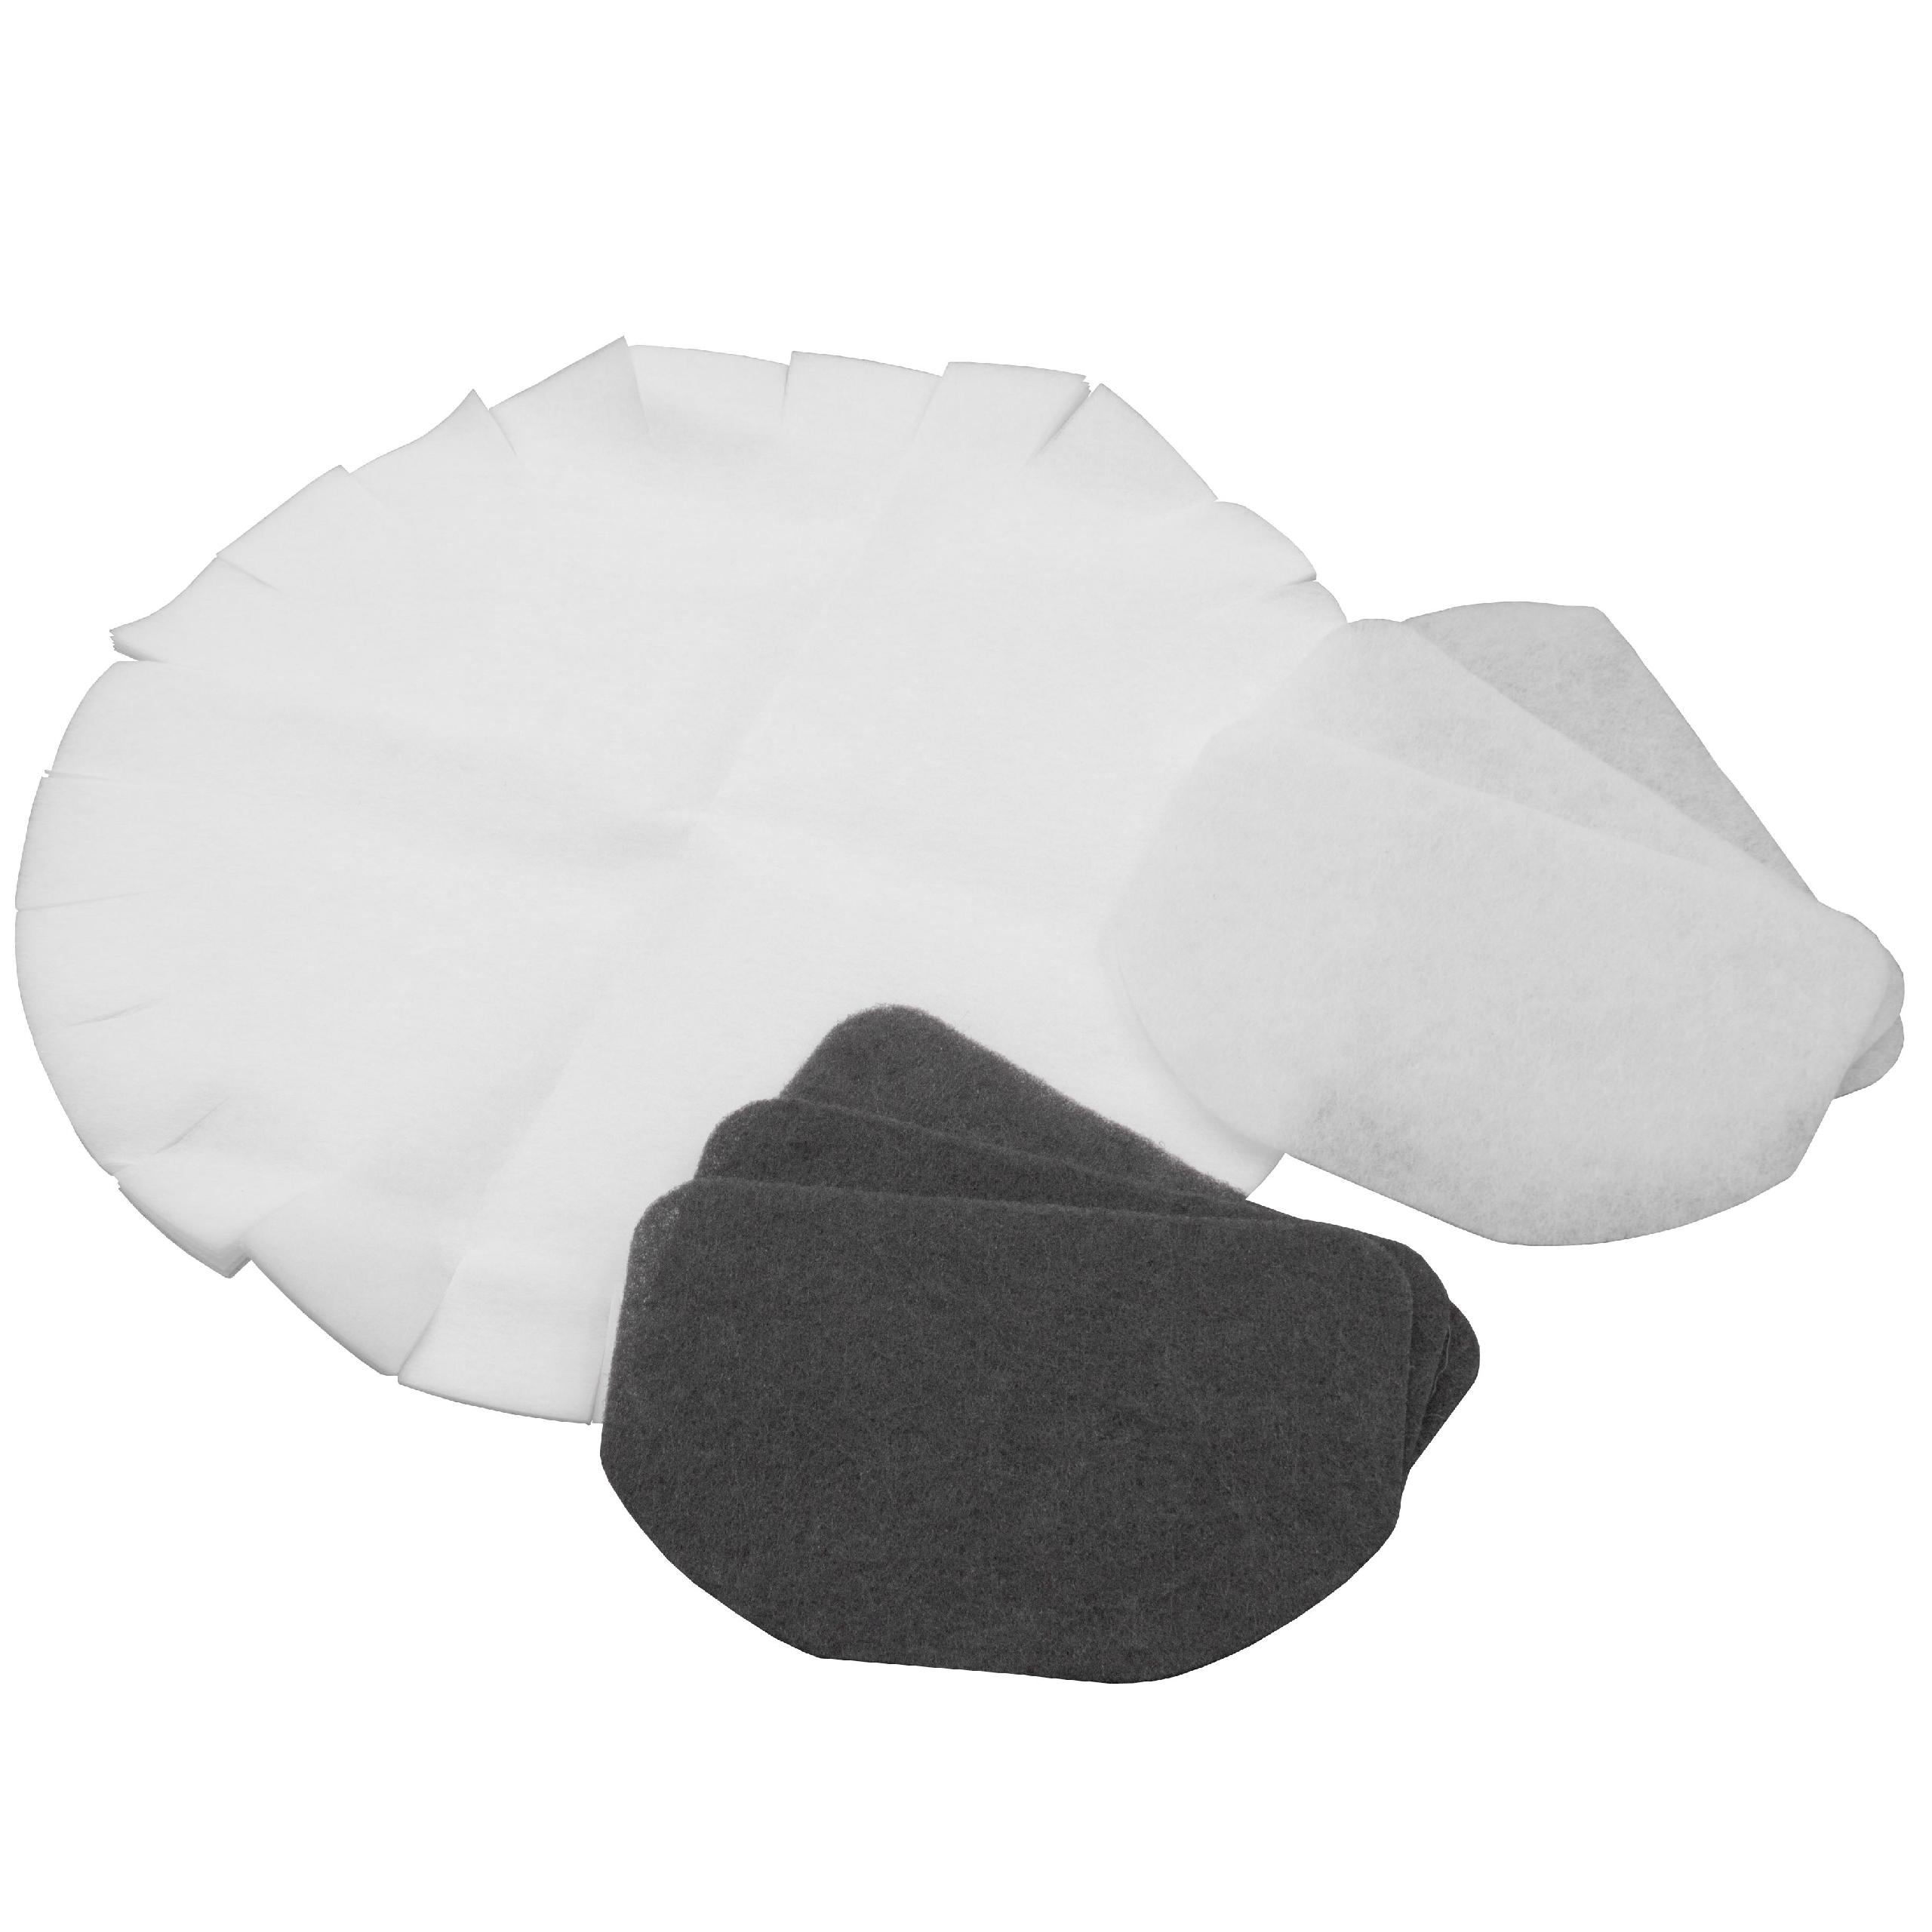 6x paper air filter, 3x activated carbon filter, 3x grease filter replaces DeLonghi 5525102200 for Fryer